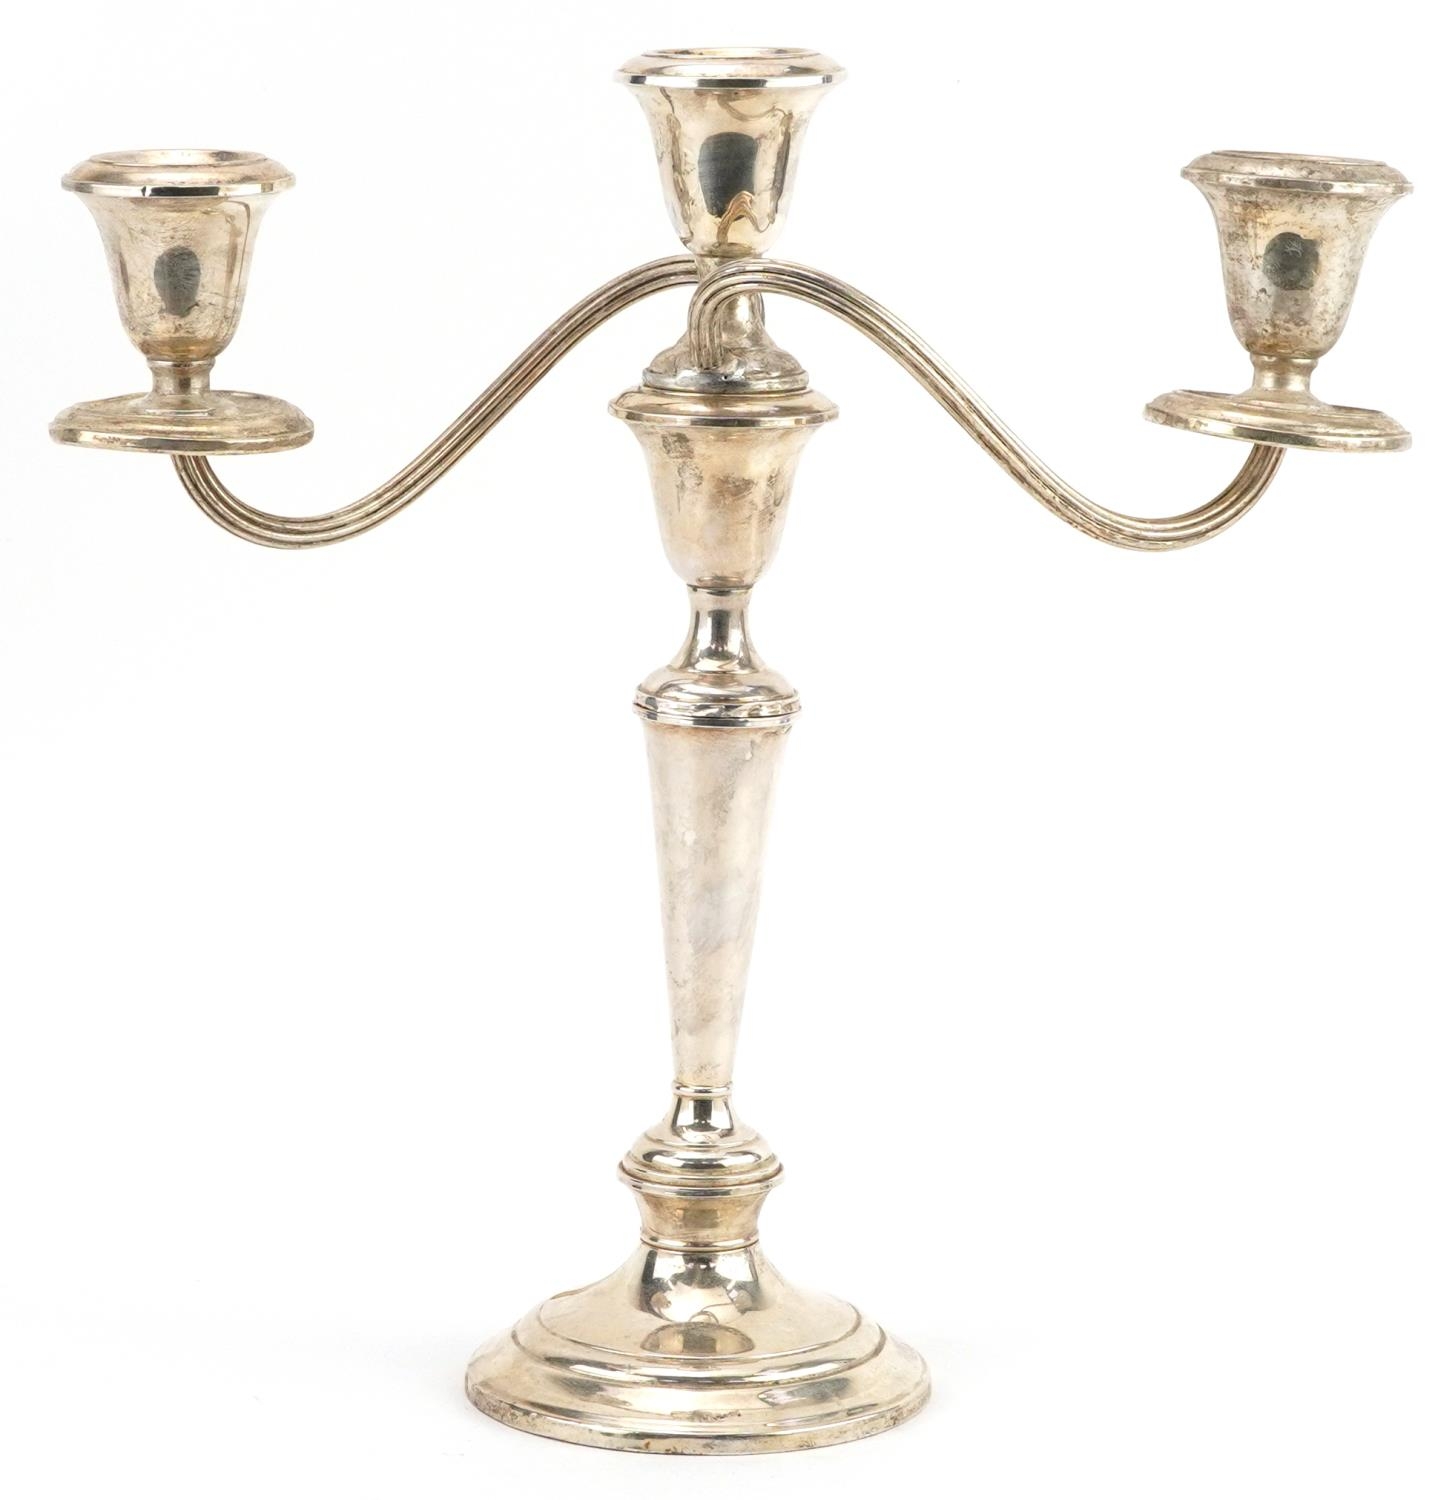 Gorham, American sterling silver three branch candelabra numbered 808/1 to the base, 29.5cm high, - Image 2 of 5